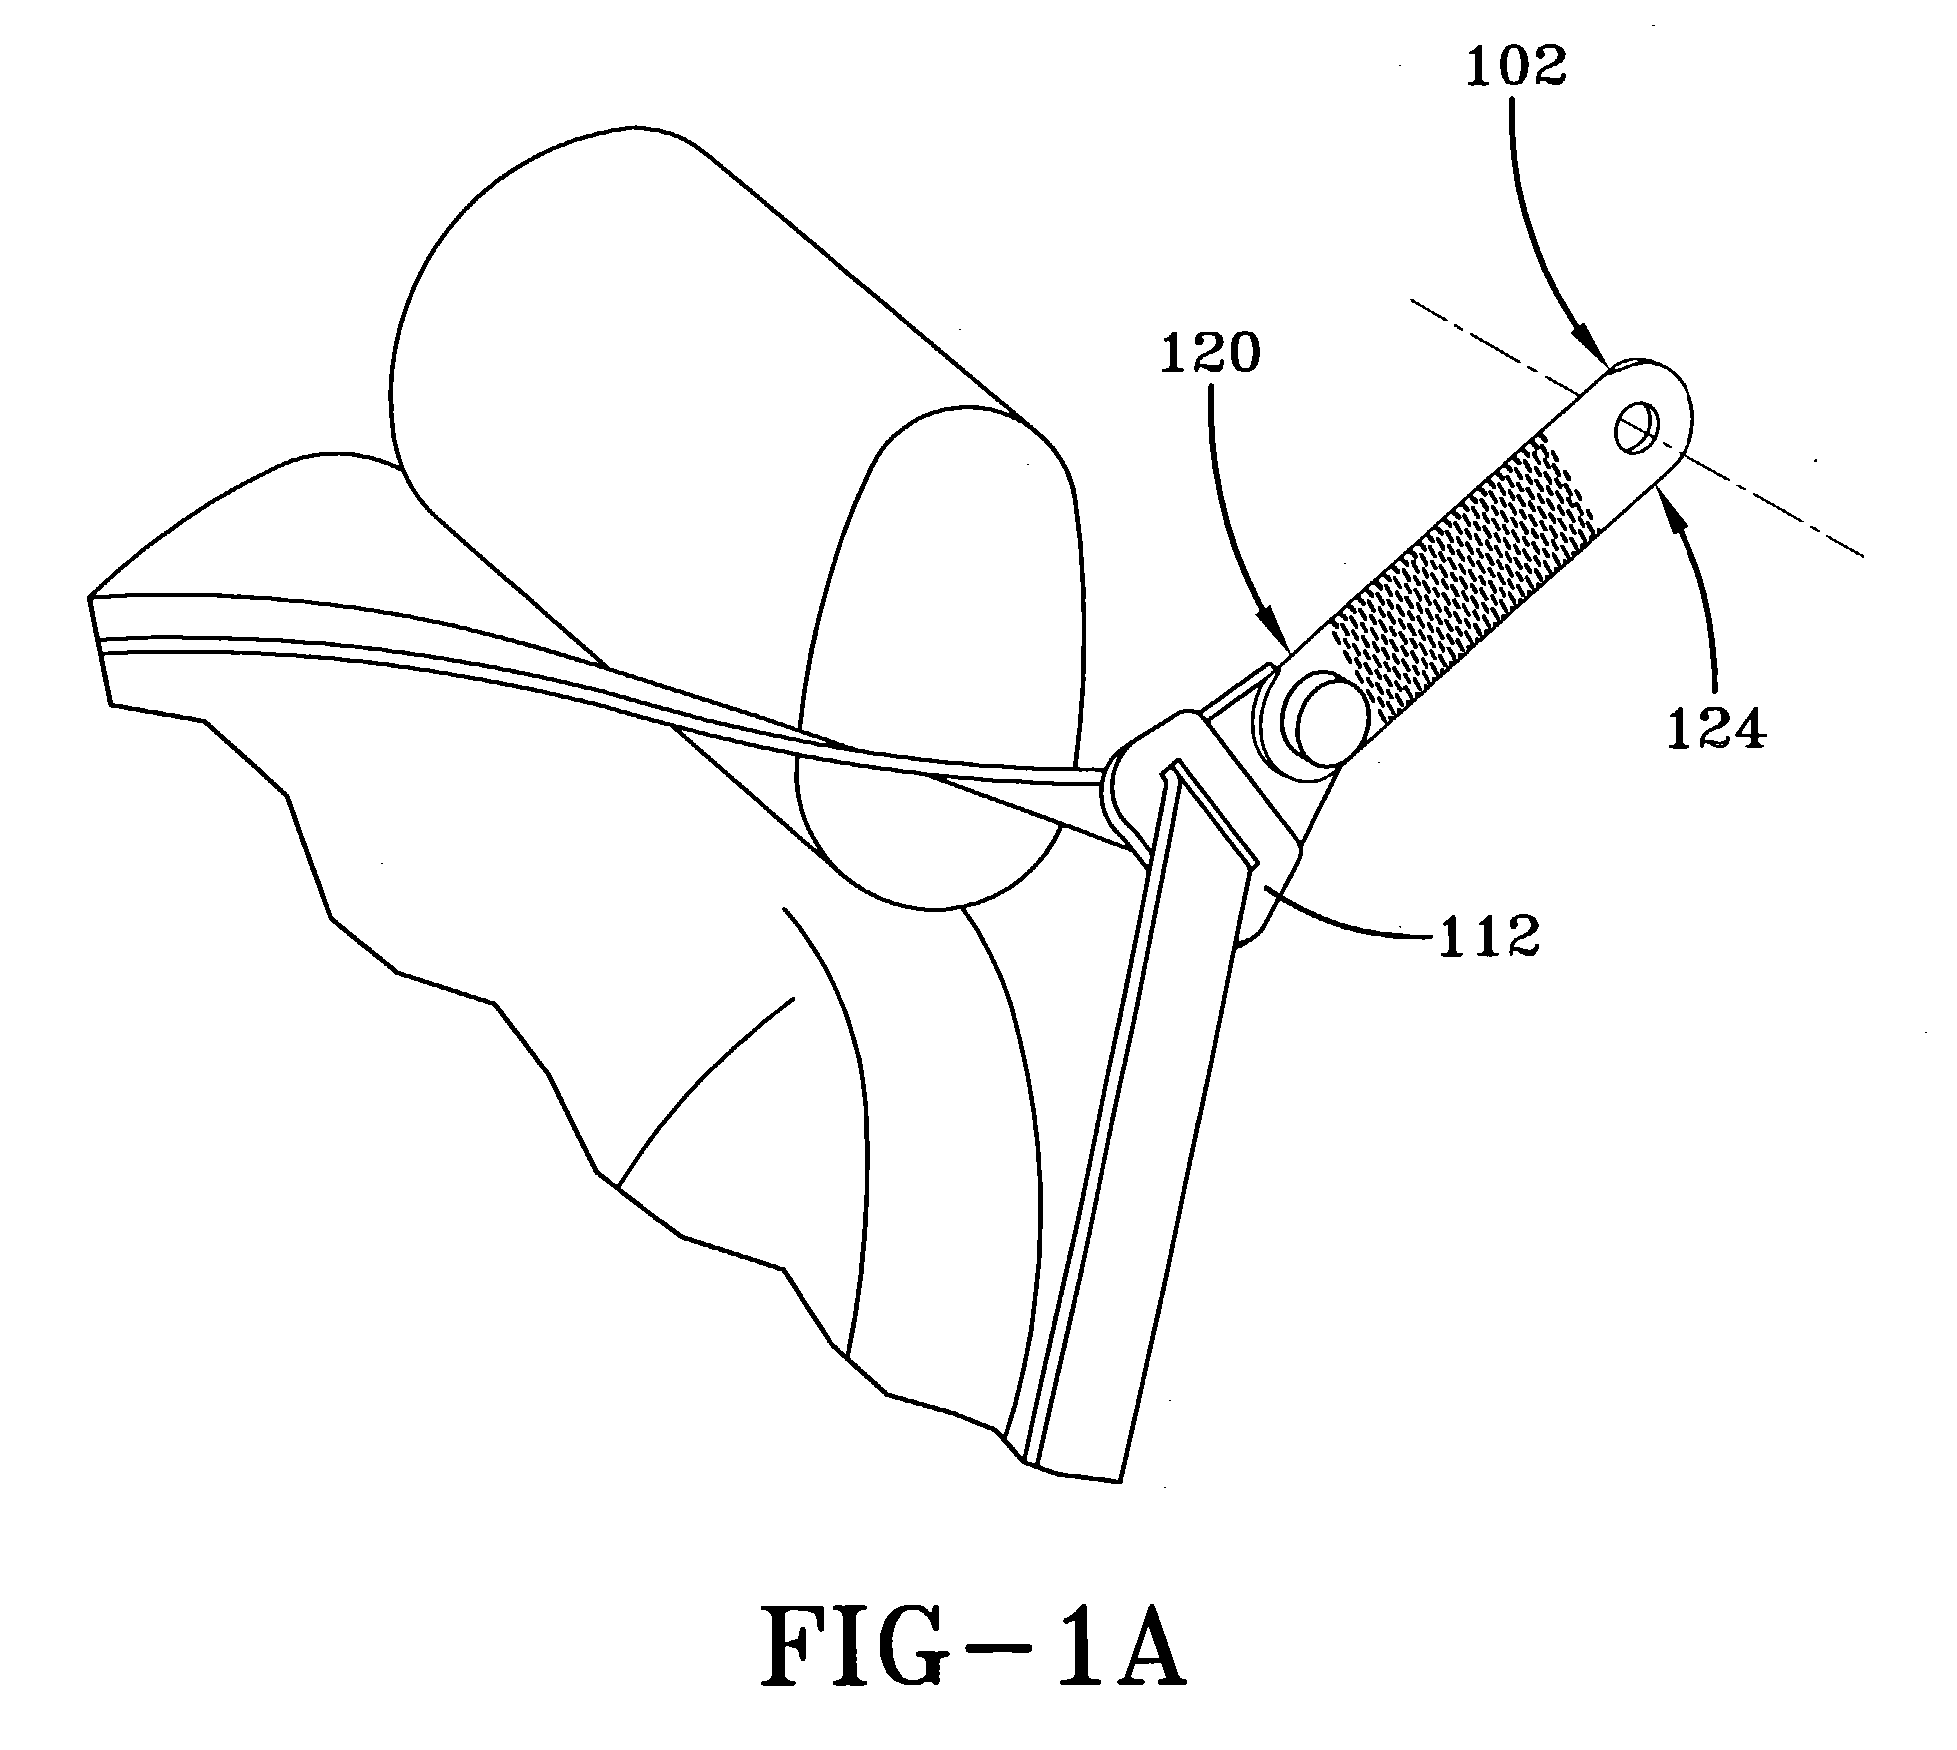 Load limiting structure for vehicle occupant restraint system